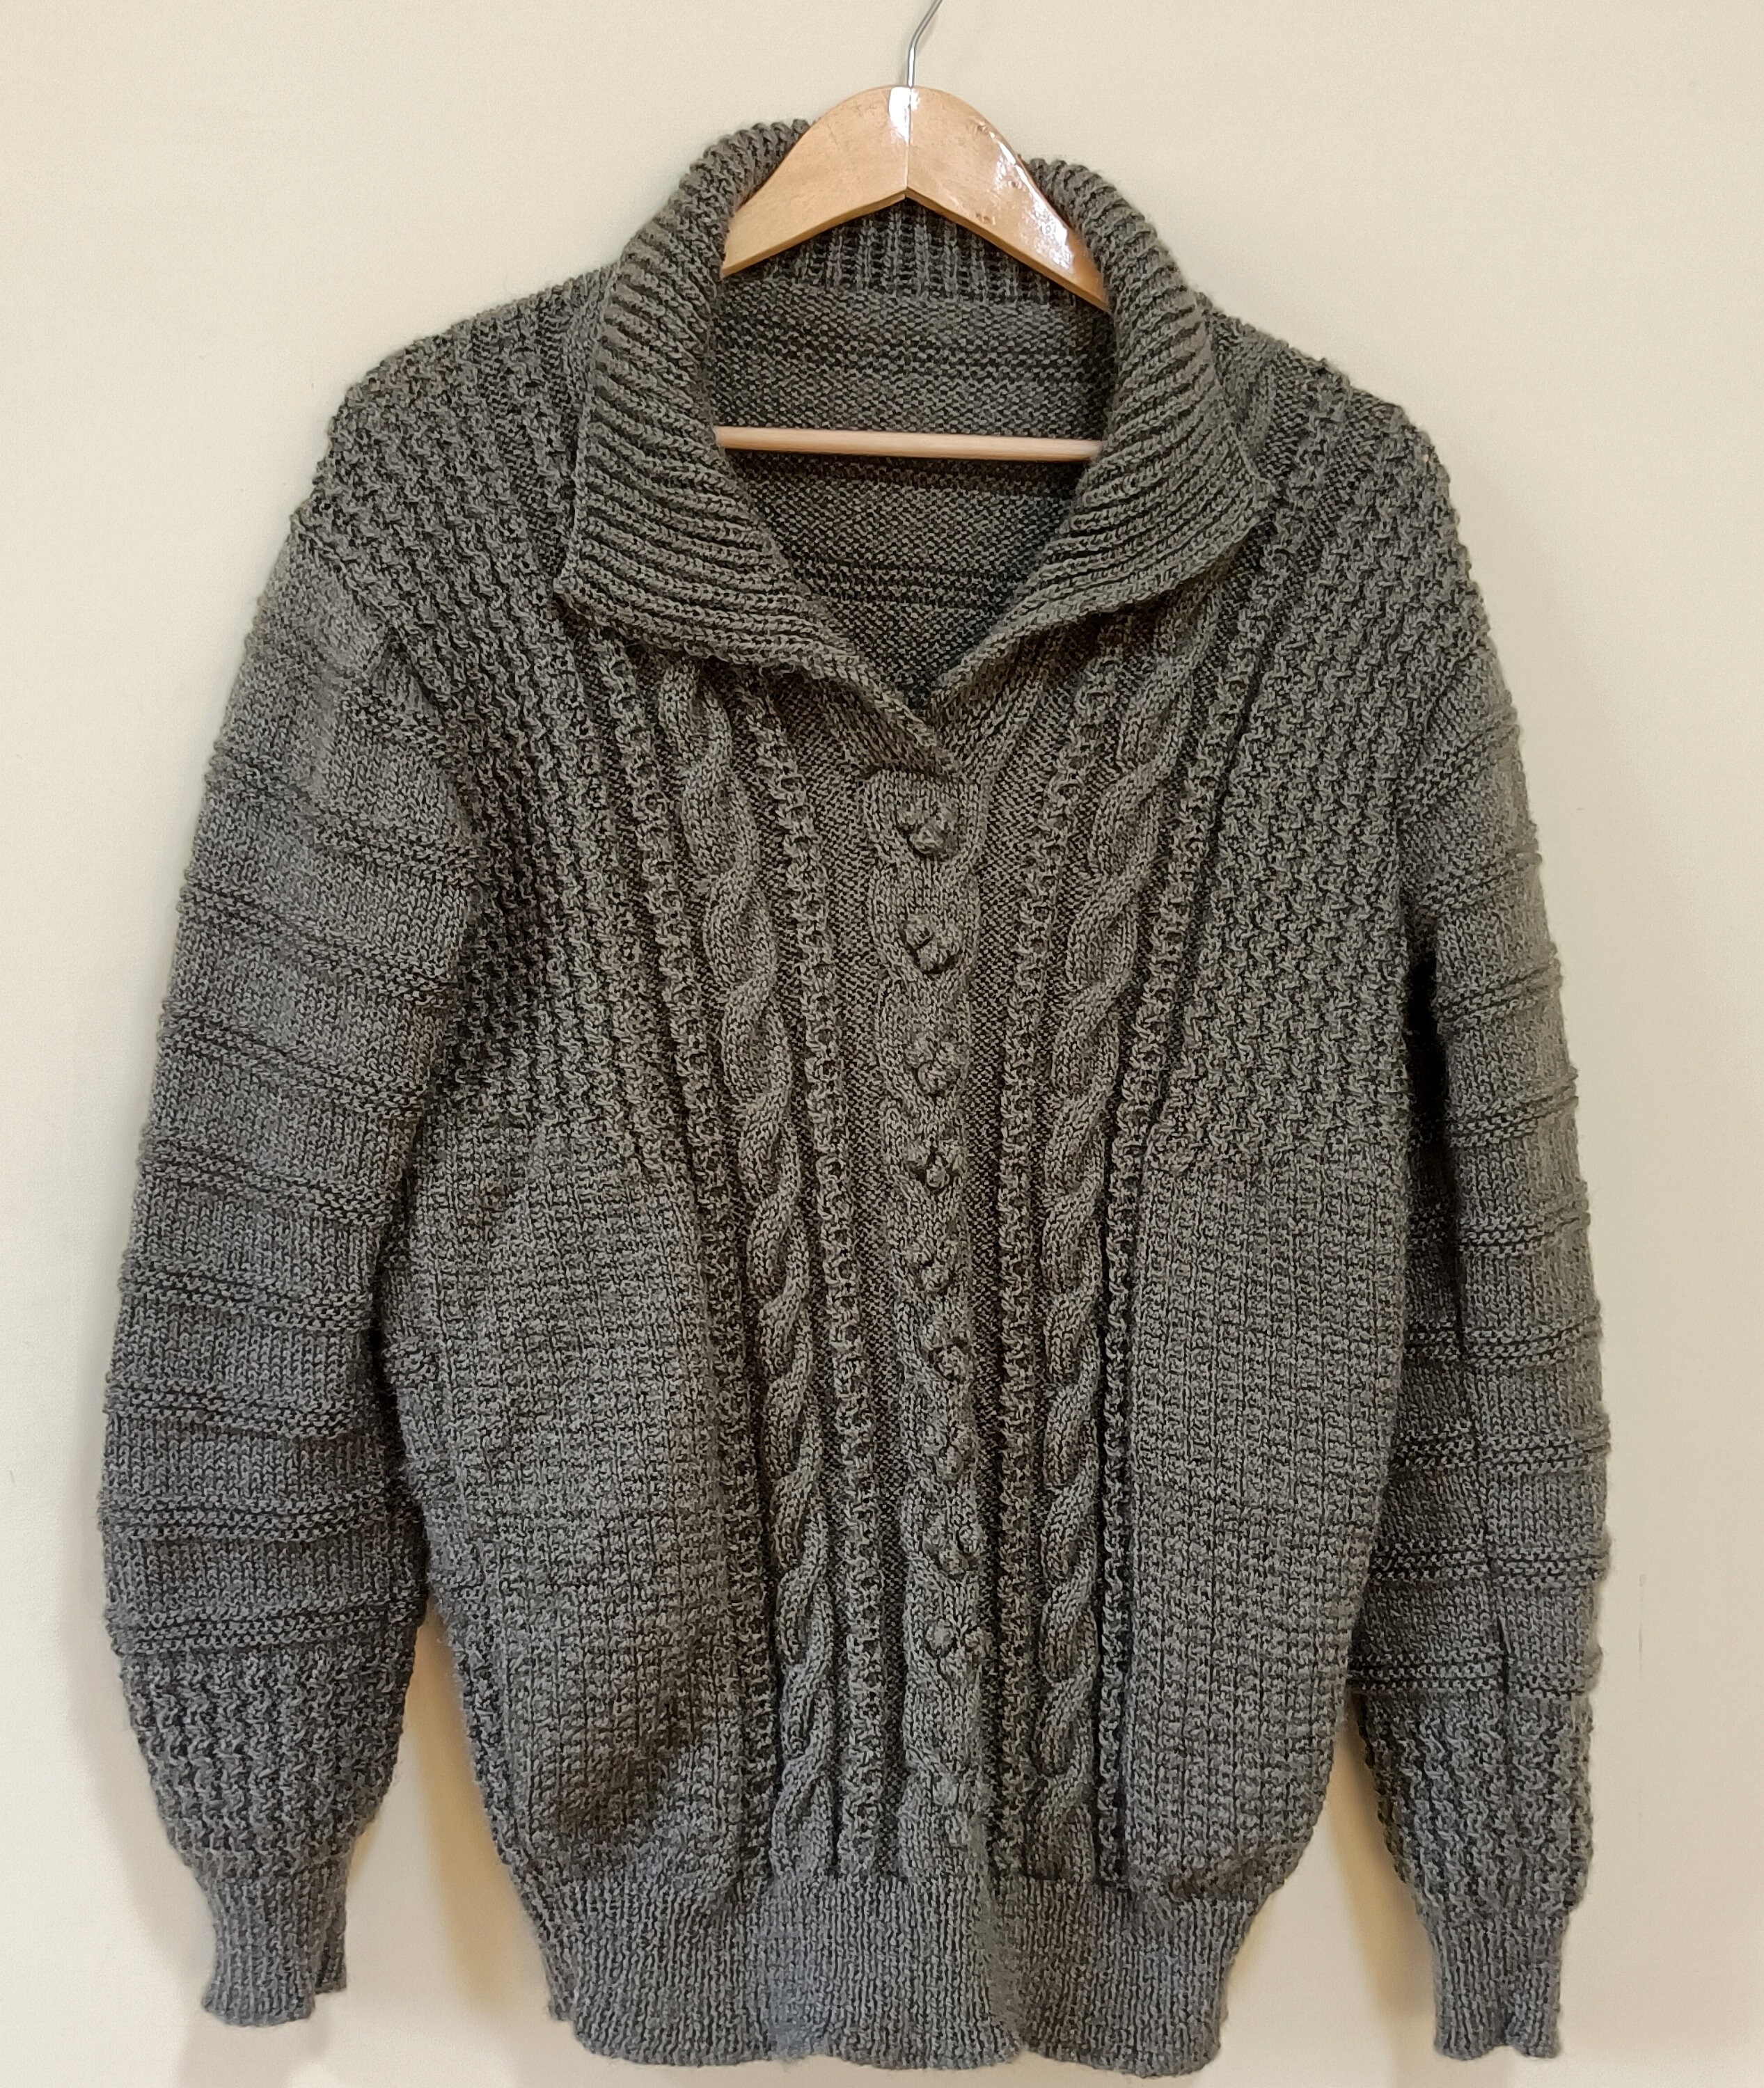 Grey Cable Knit Sweater Cardigan,Ugly Christmas Sweater,Hand knitted  cardigan , Gift For Christmas